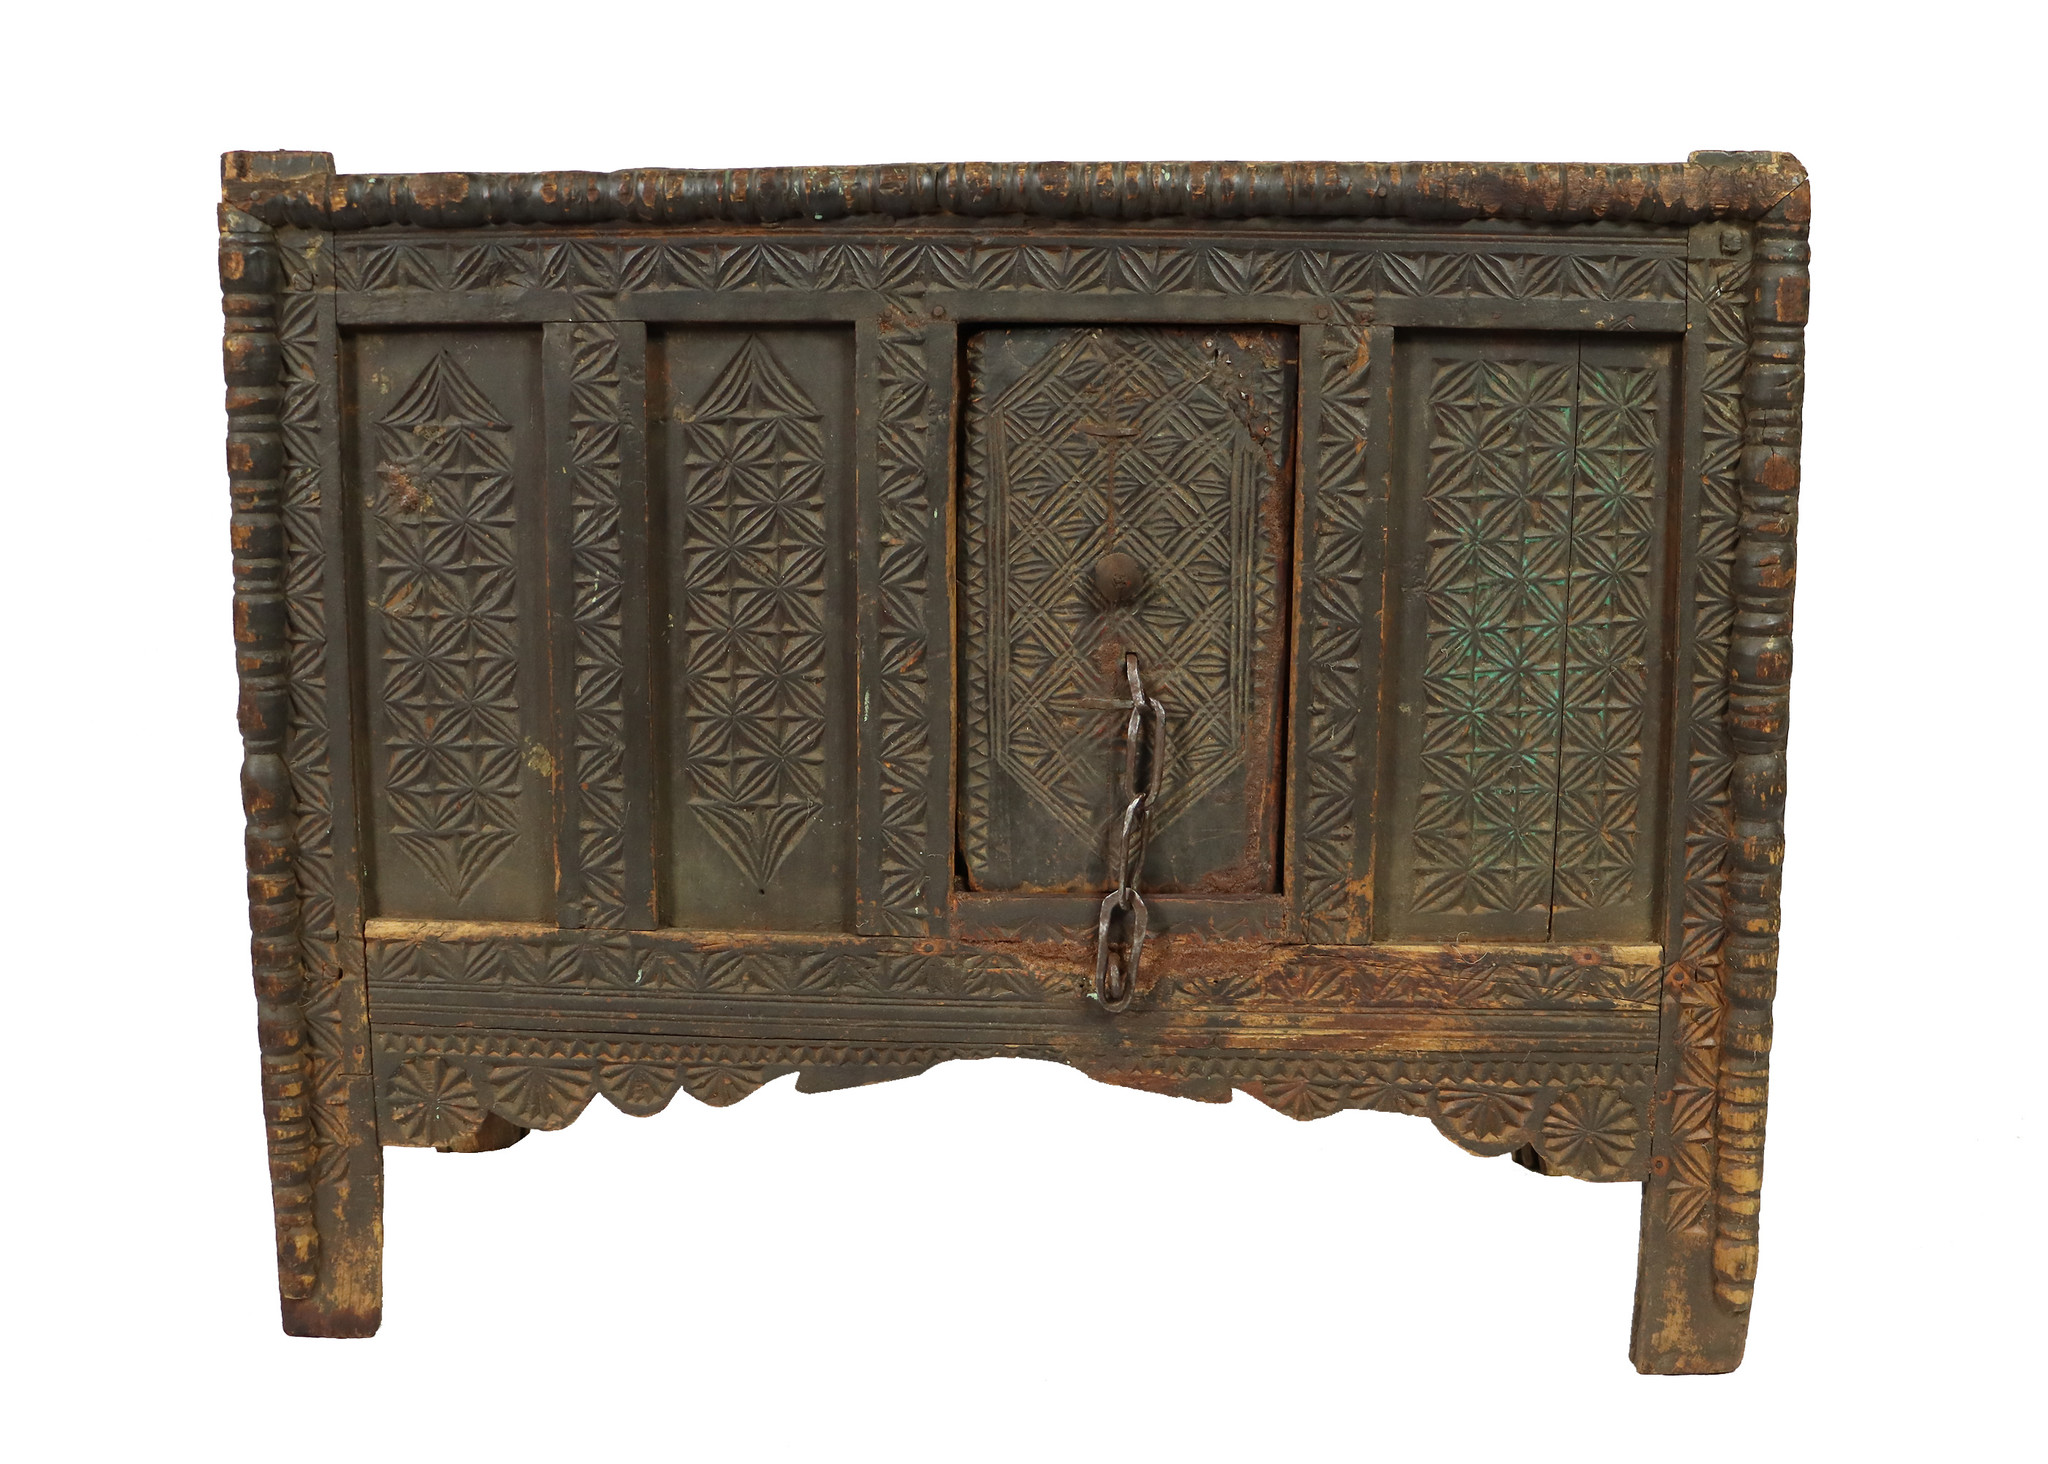 antique 19th century  wooden yurt treasure Dowry Chest from Afghanistan turkmenistan No:22/ 4